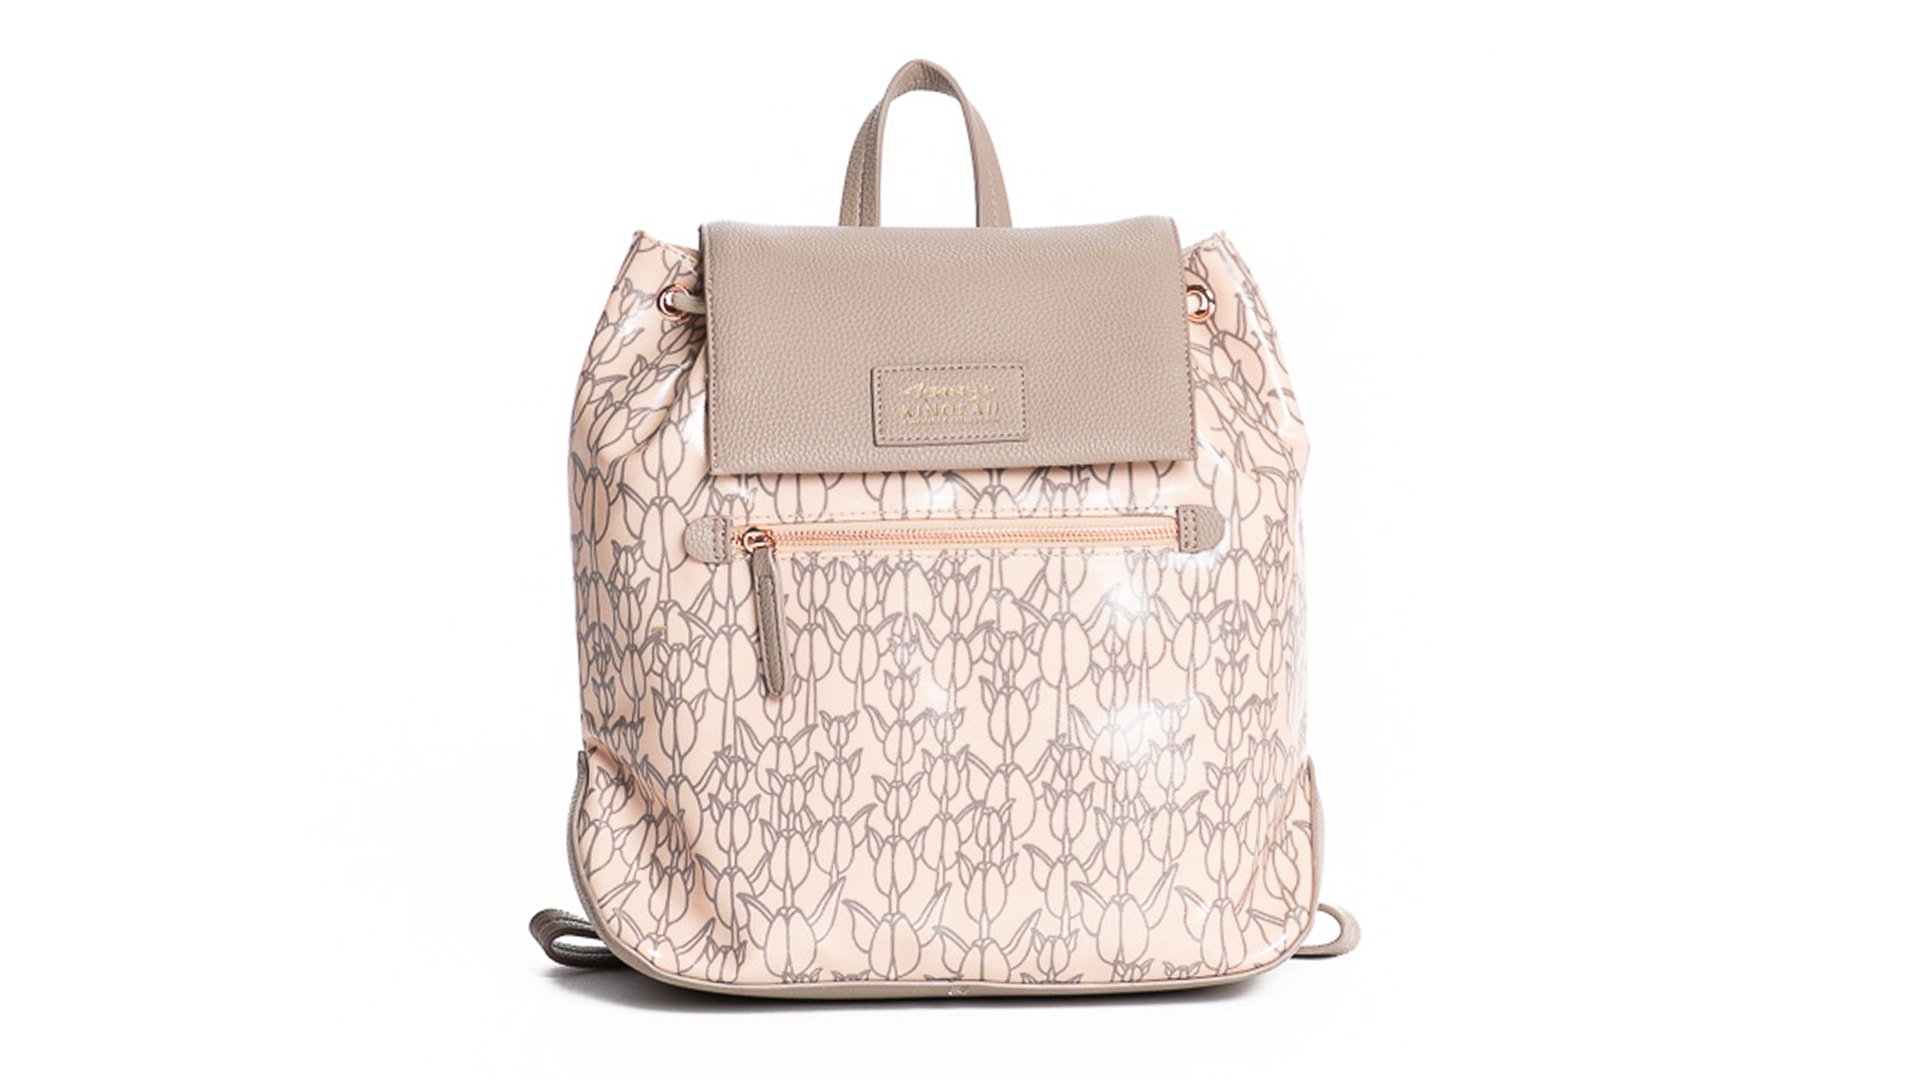 Laulii backpack in Apricot Sherbert/Gingersnap